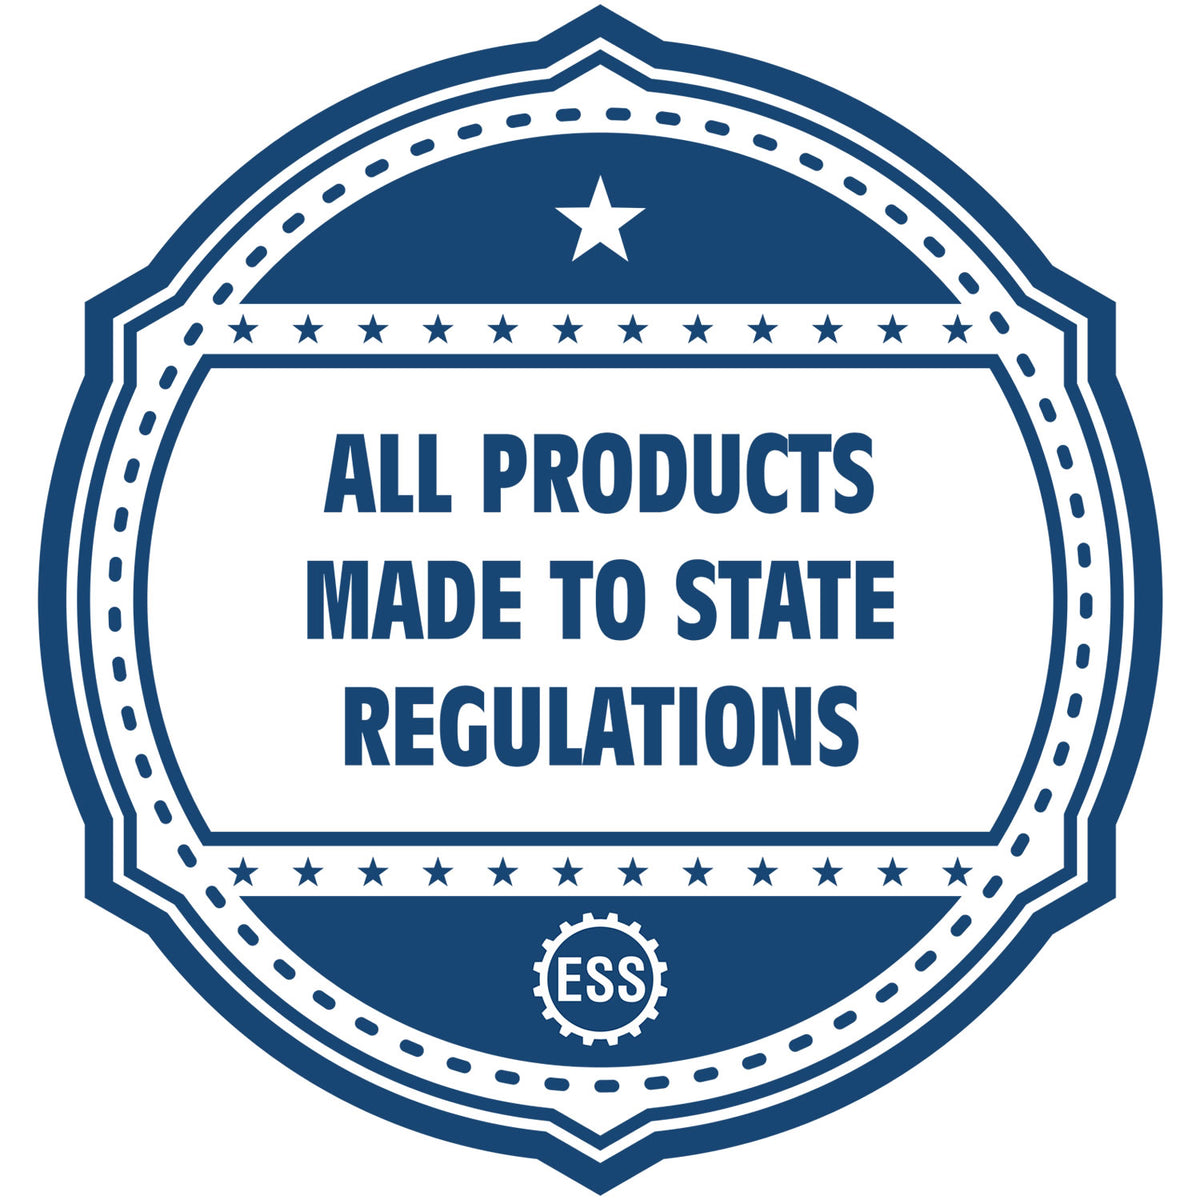 A blue icon or badge for the Hybrid New Hampshire Architect Seal showing that this product is made in compliance with state regulations.